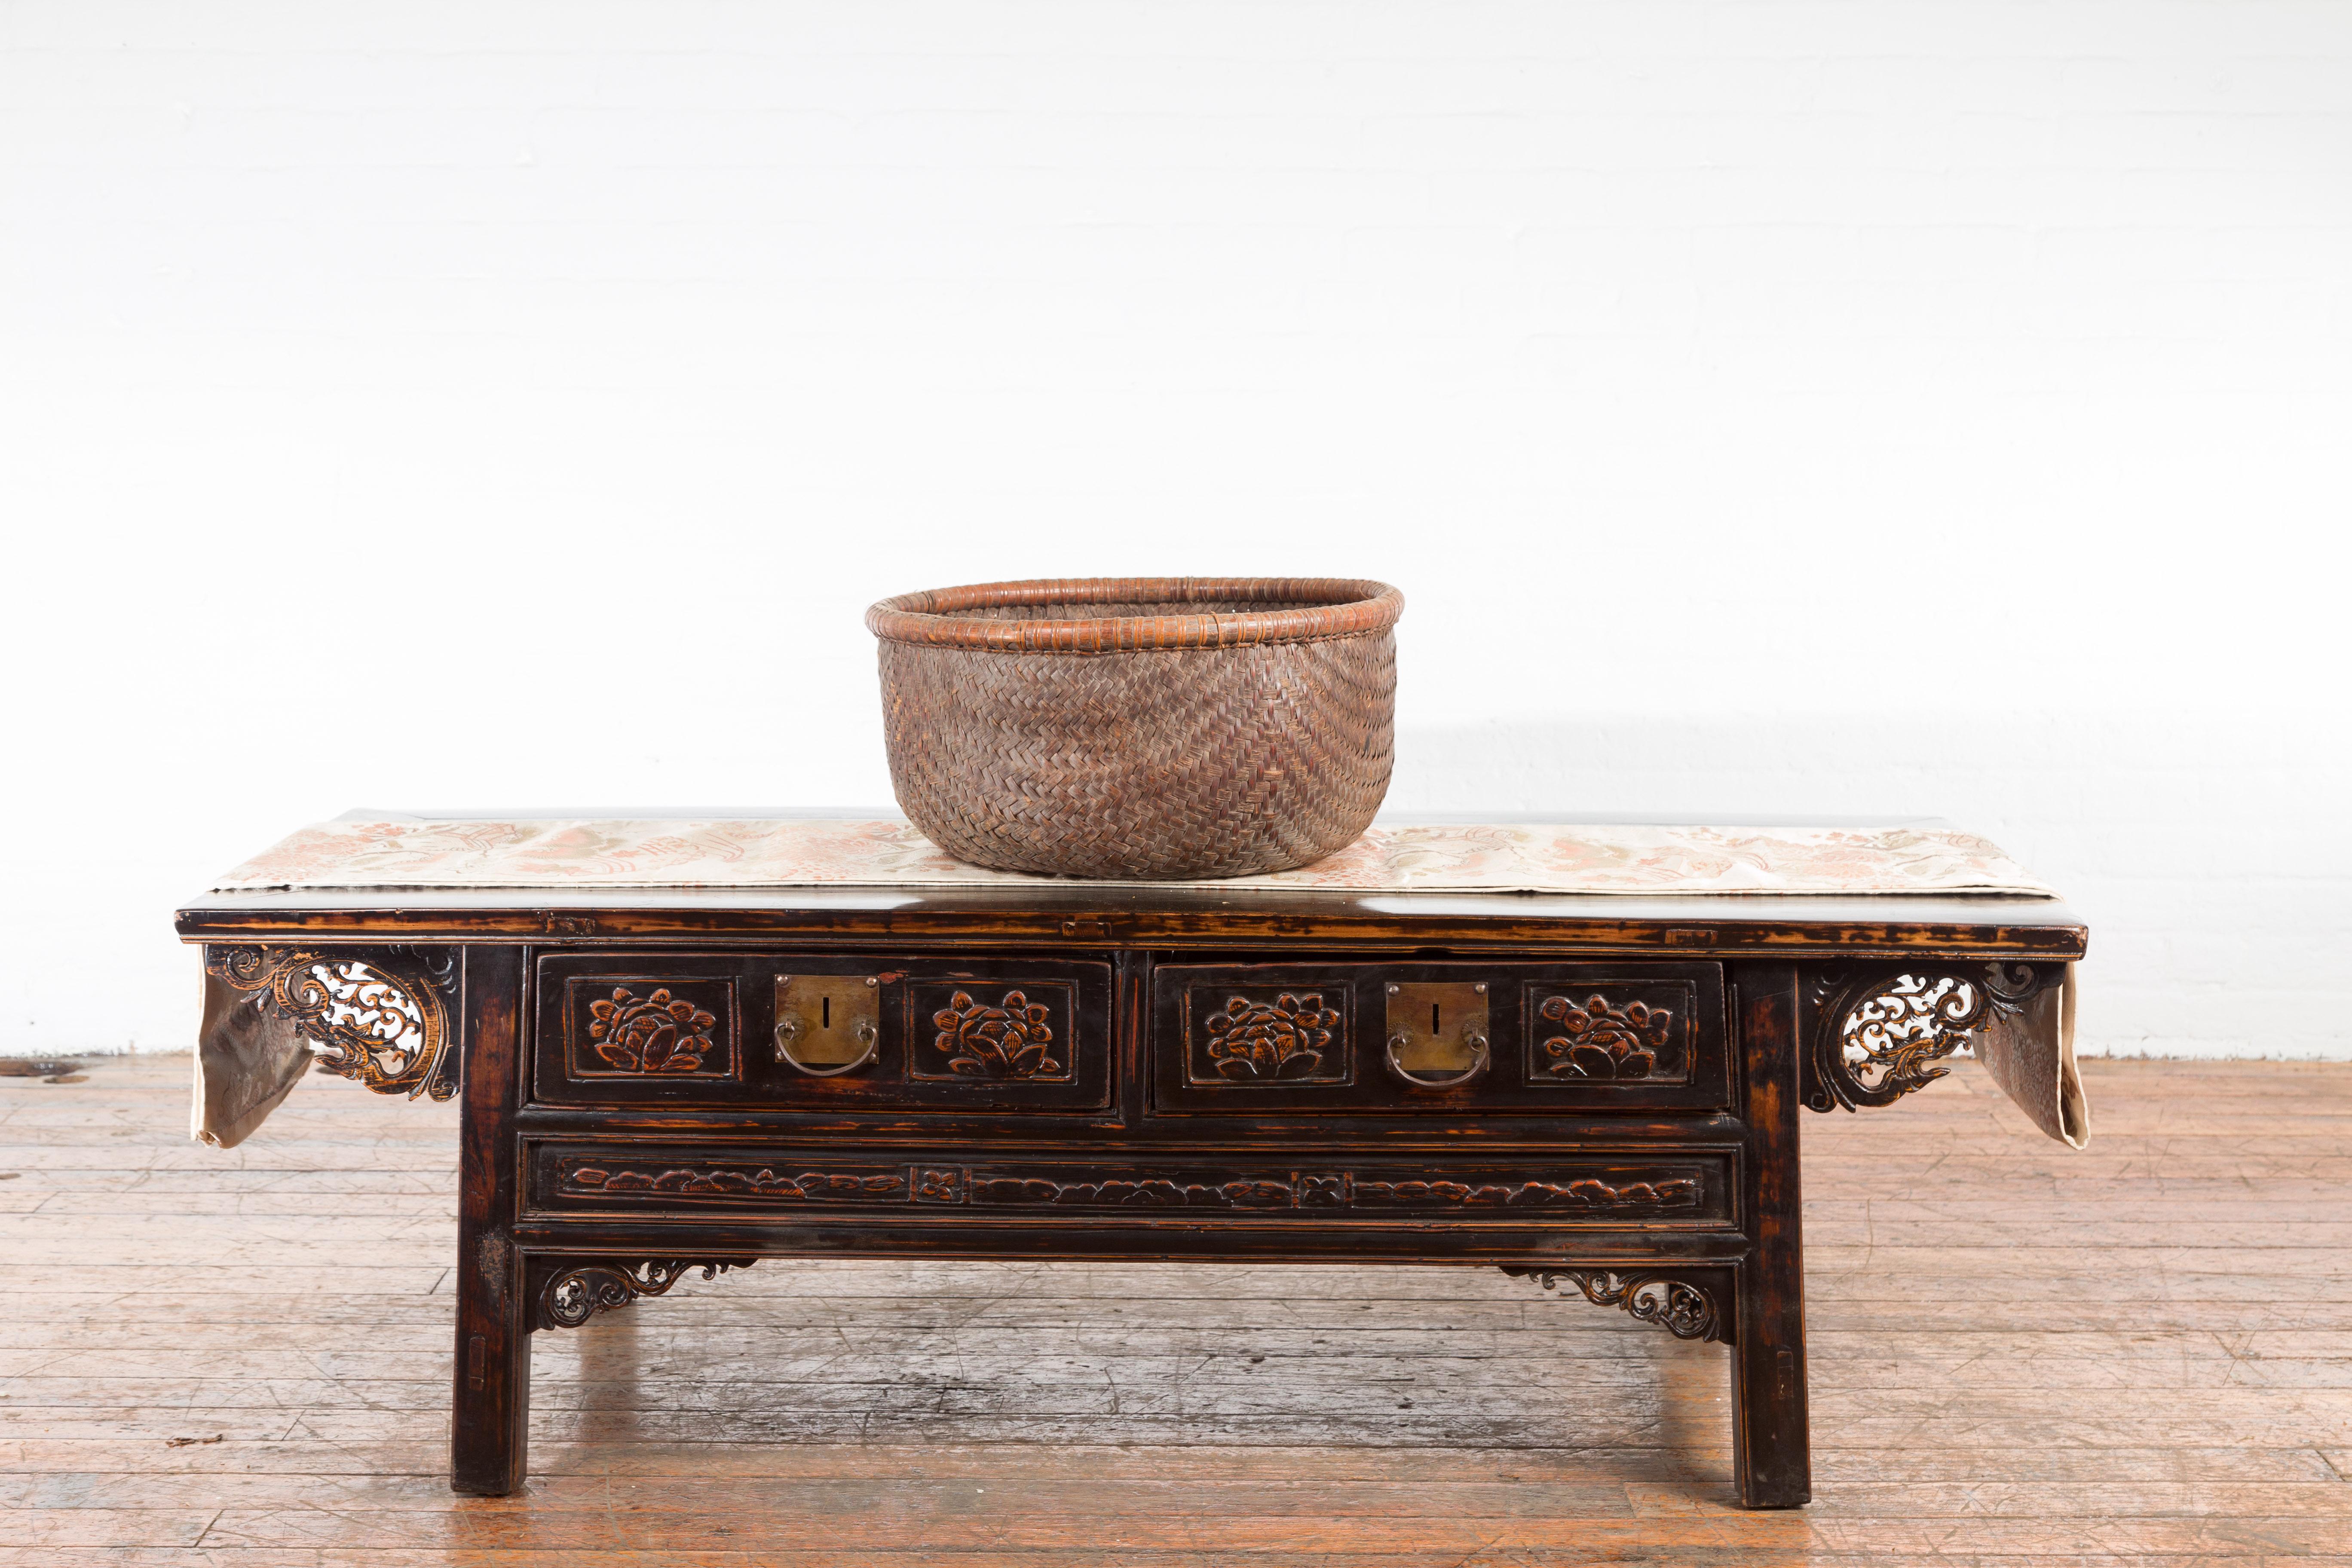 A Chinese Qing Dynasty antique rattan round grain basket from the 19th century, with nice patina. Created in China during the 19h century, this grain basket features a thin lip sitting above a brown woven rattan body. With its rustic appeal and